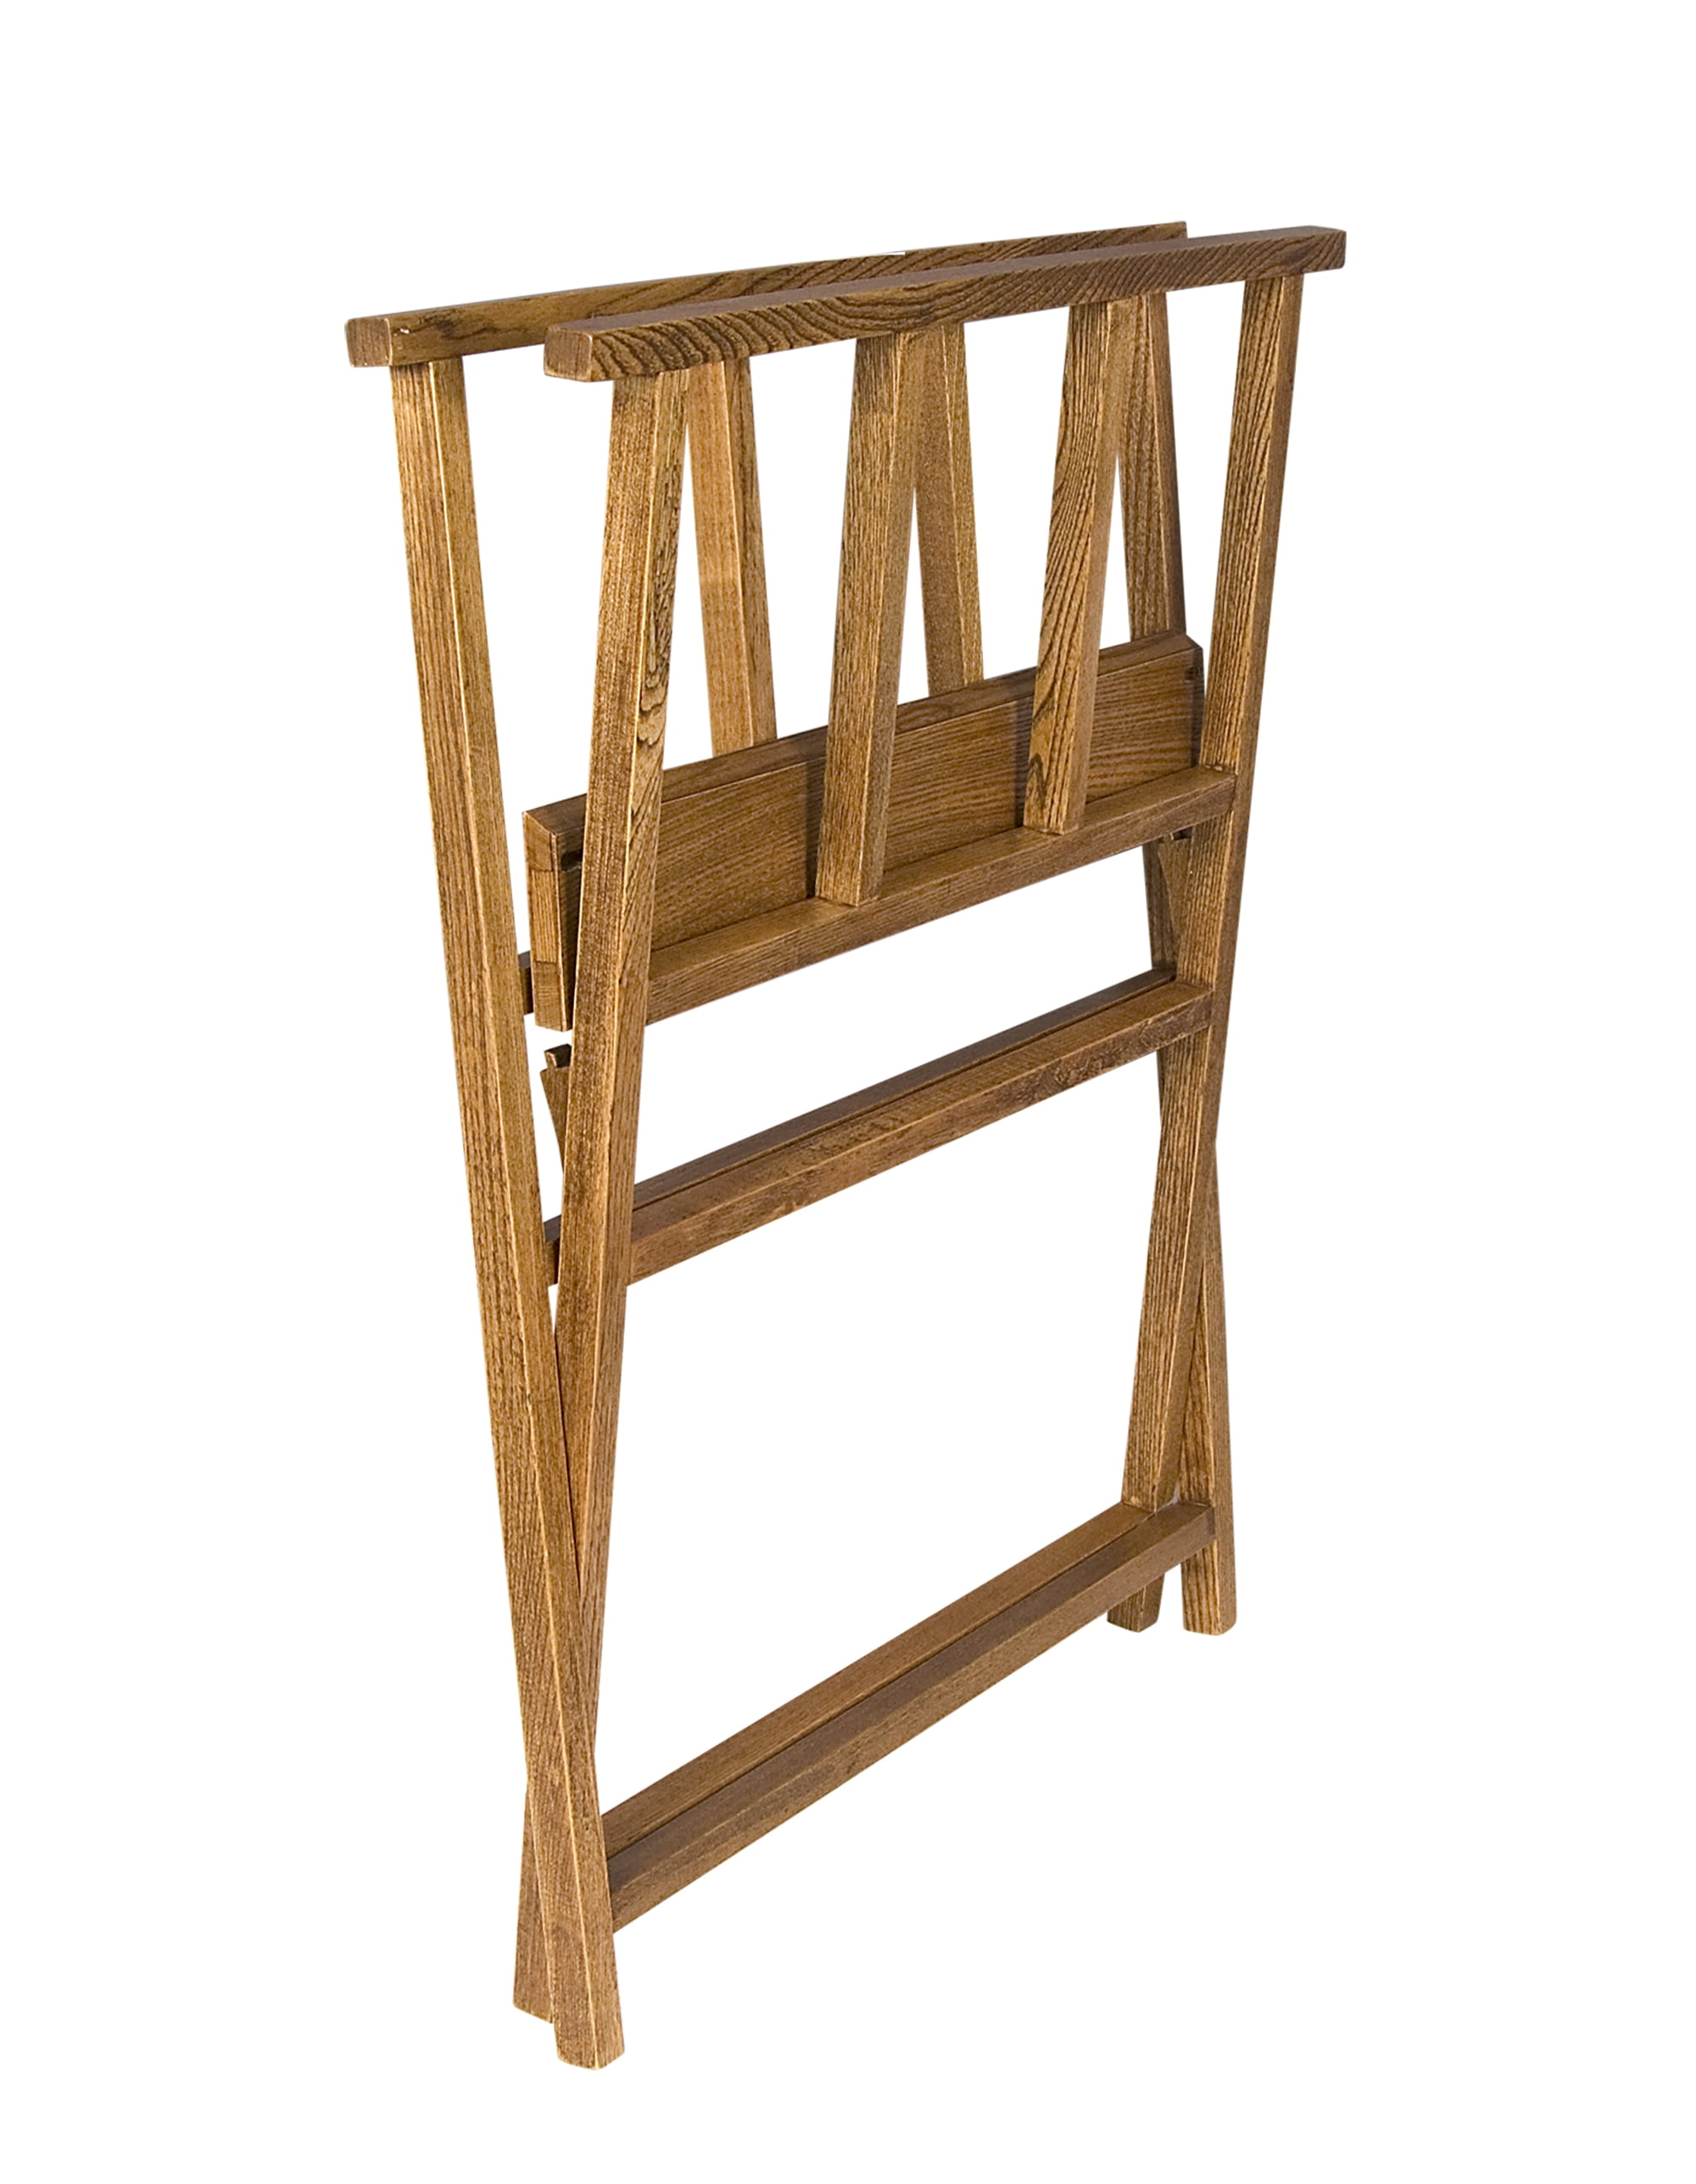 Creative Mark Folding Wood Large Print Rack - Perfect for Display of  Canvas, Art, Prints, Panels, Posters, Art Gallery Shows, Storage Racks